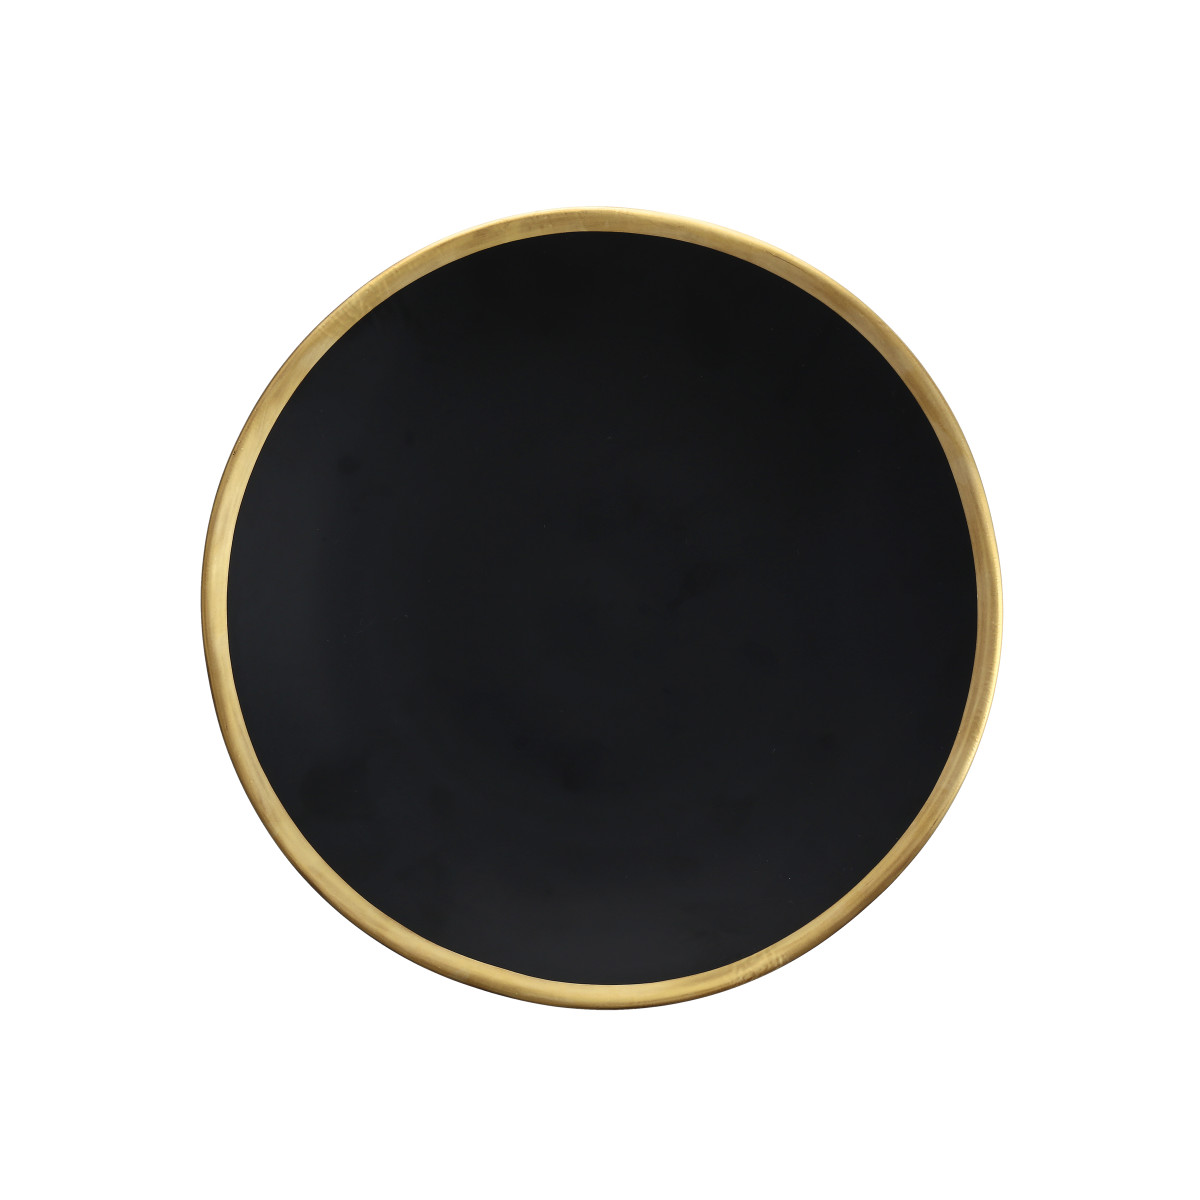 Heirloom Gold Band Charcoal Show Plate 12"